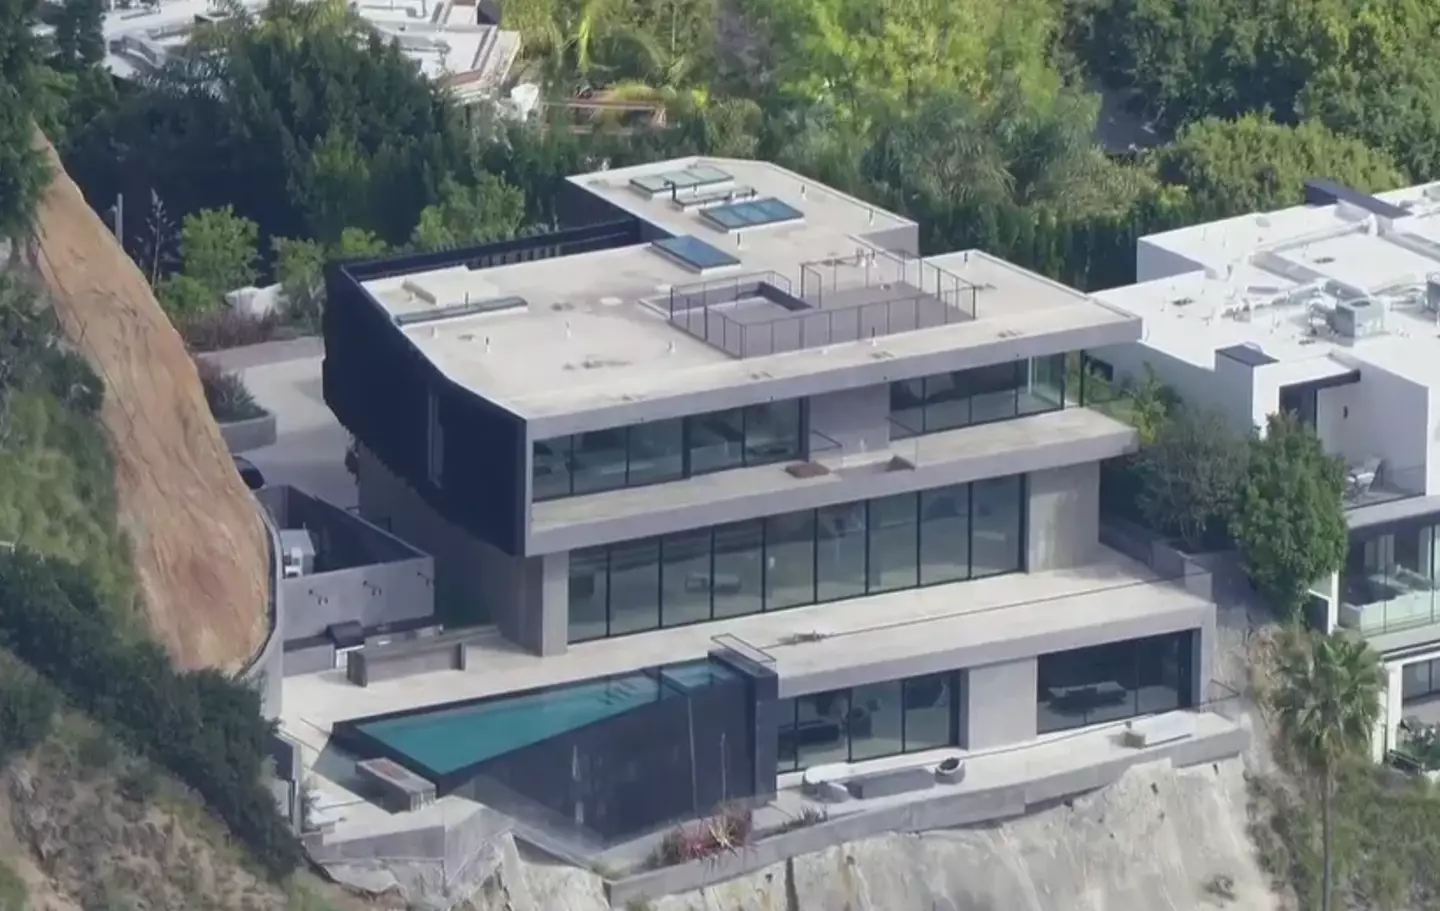 The new billionaire's home is as incredible as you'd expect.